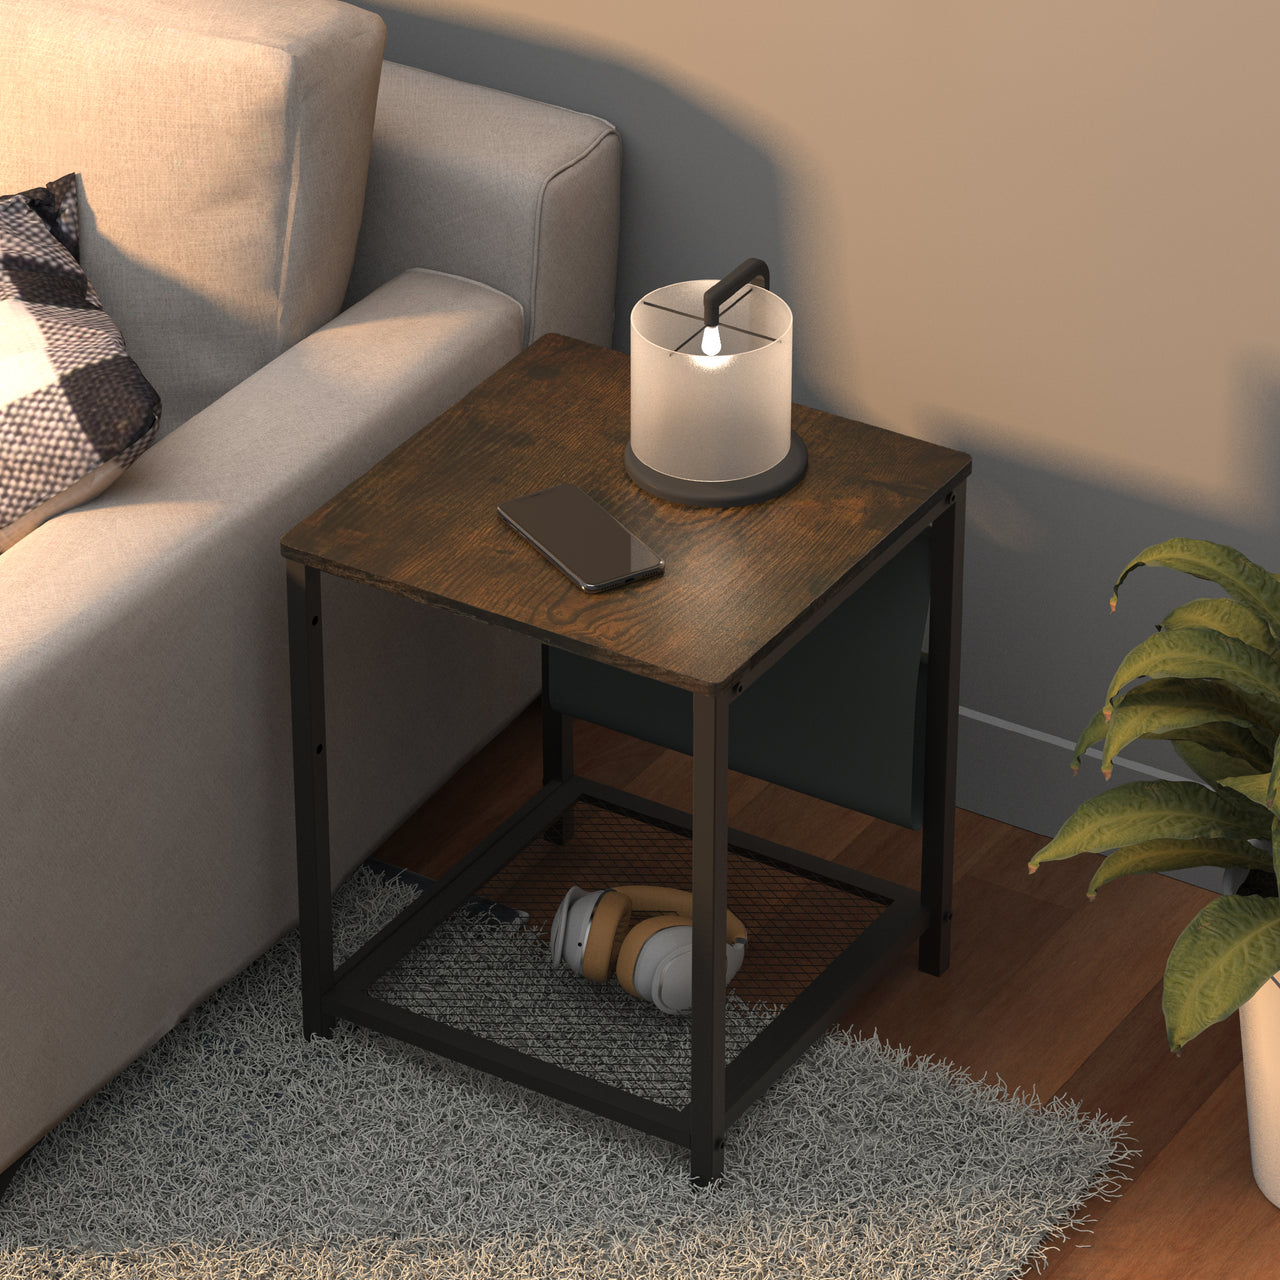 Side Table with Storage Bag, Square End Table with Grid storage rack, Sofa Table for Living Room, Bedroom, Small Spaces,Easy Assembly,Rustic Brown